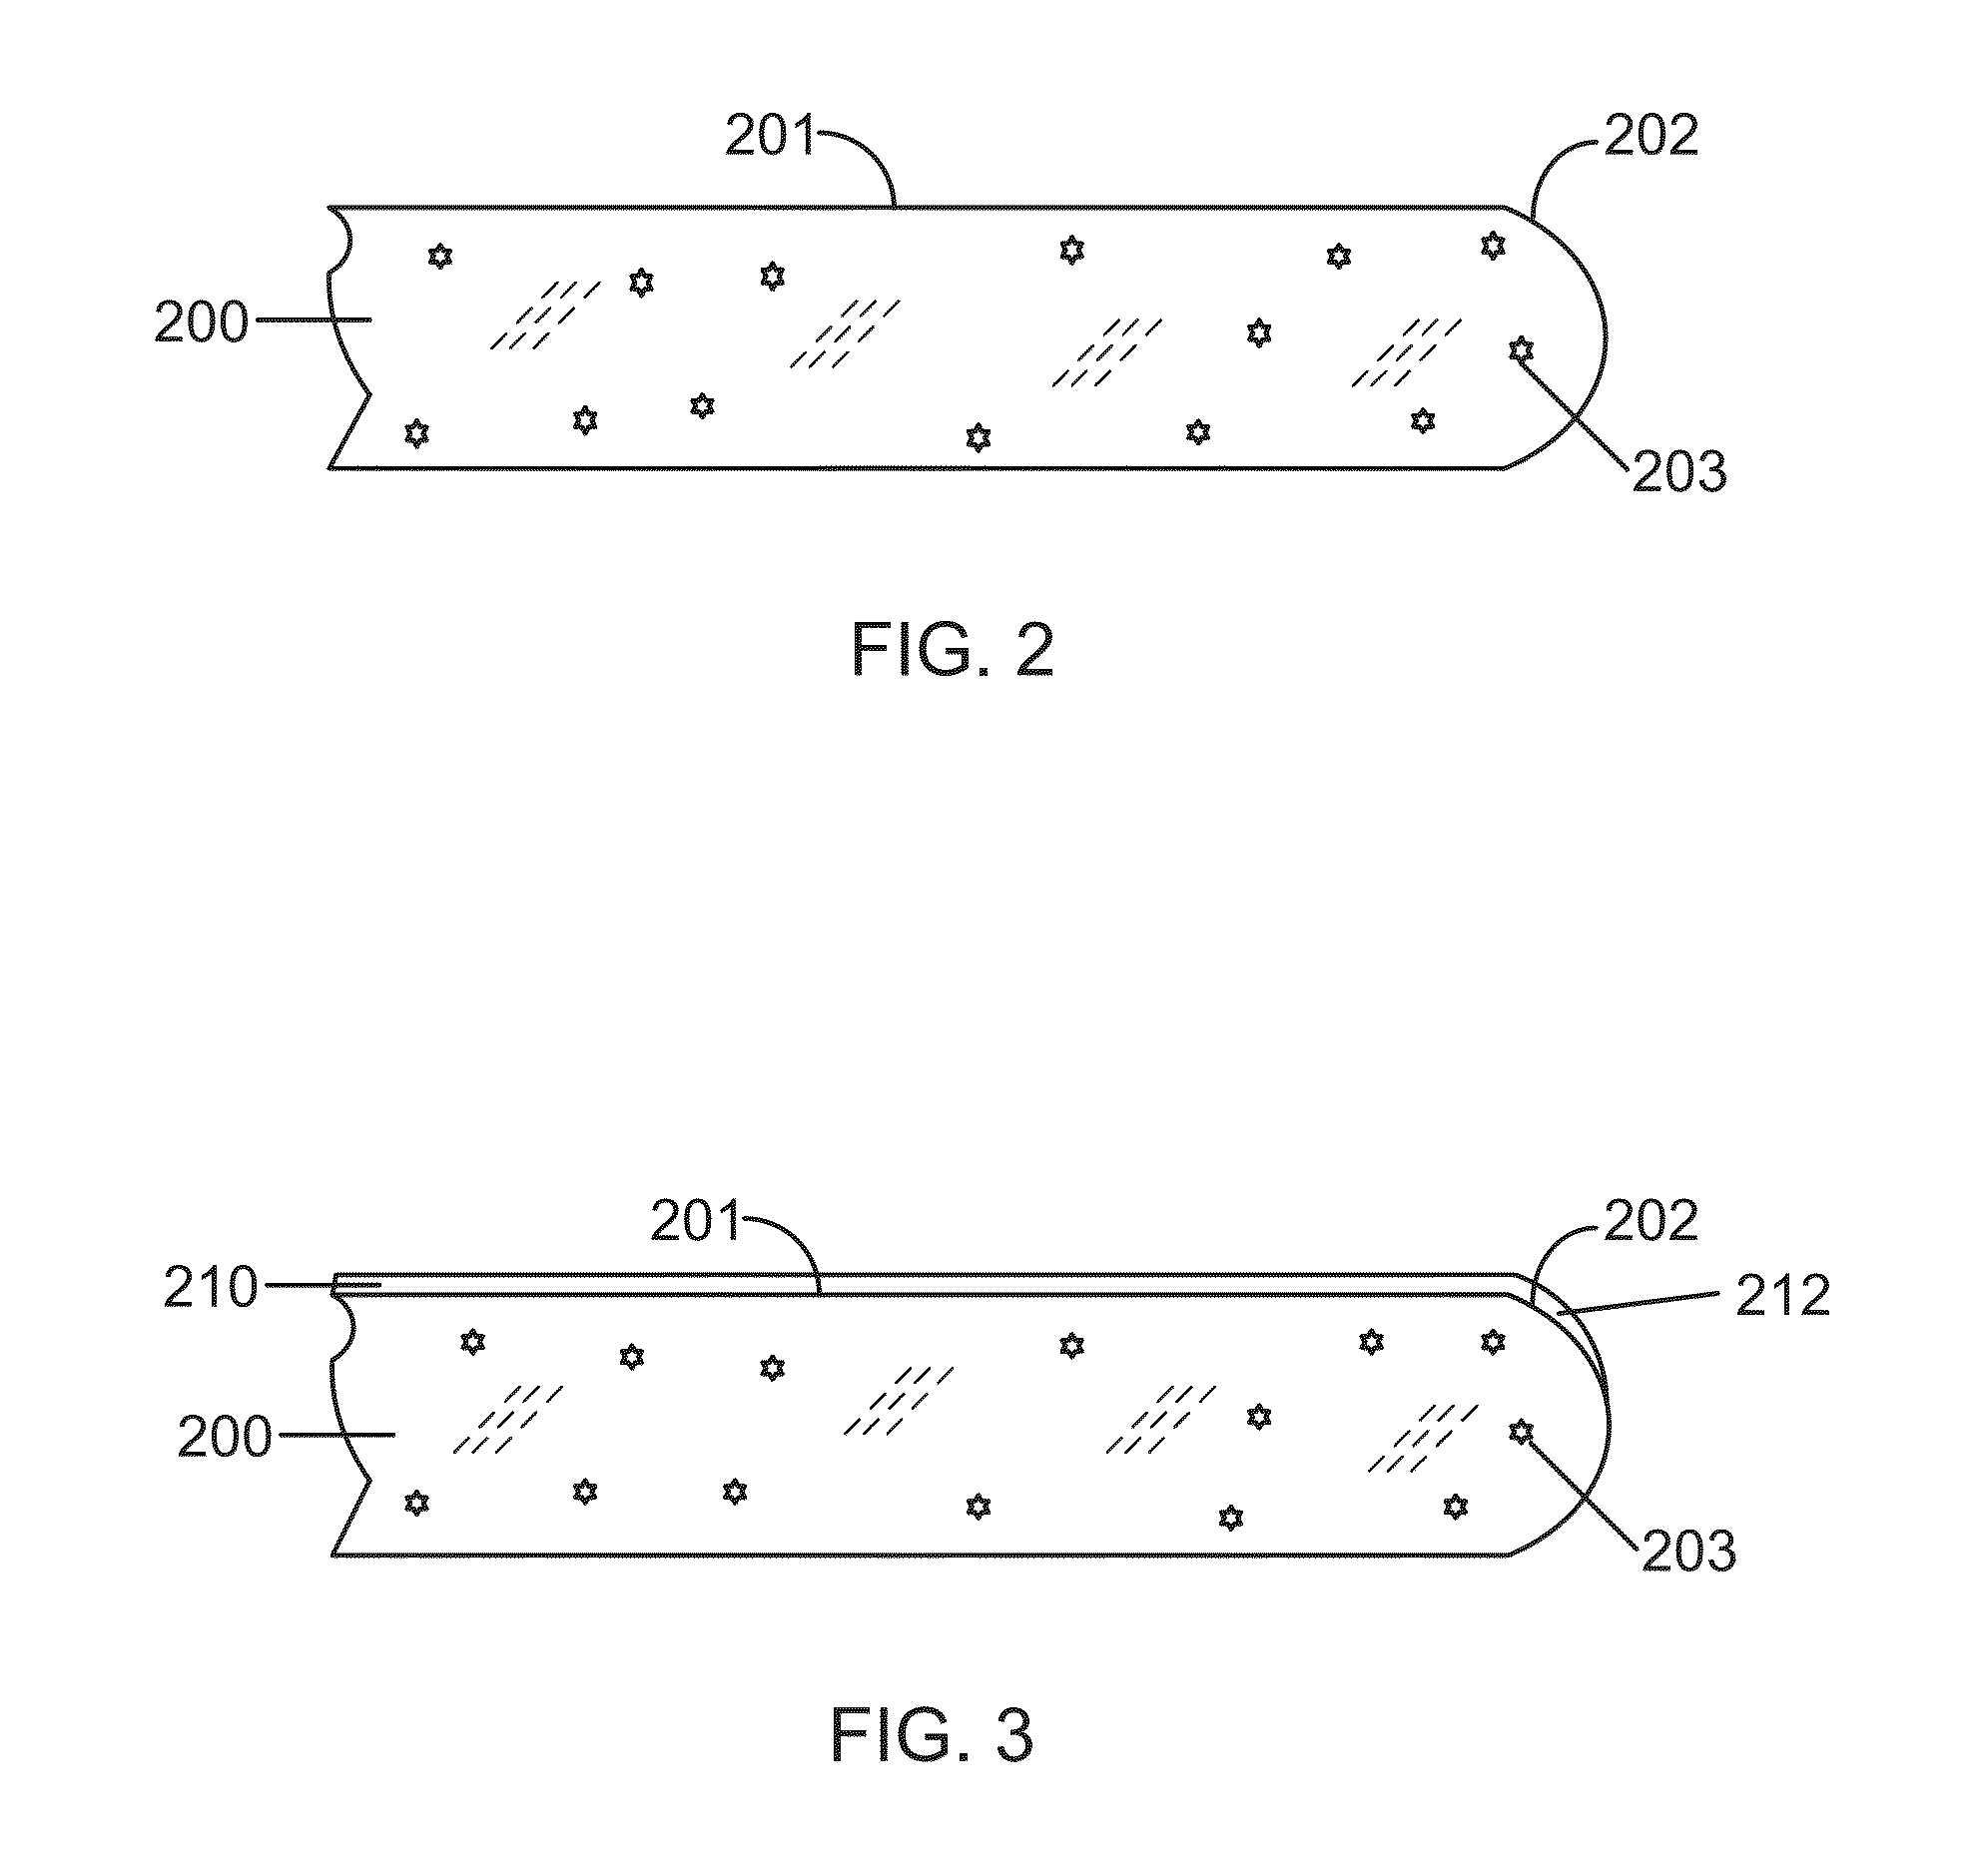 Method and structure for eliminating edge peeling in thin-film photovoltaic absorber materials